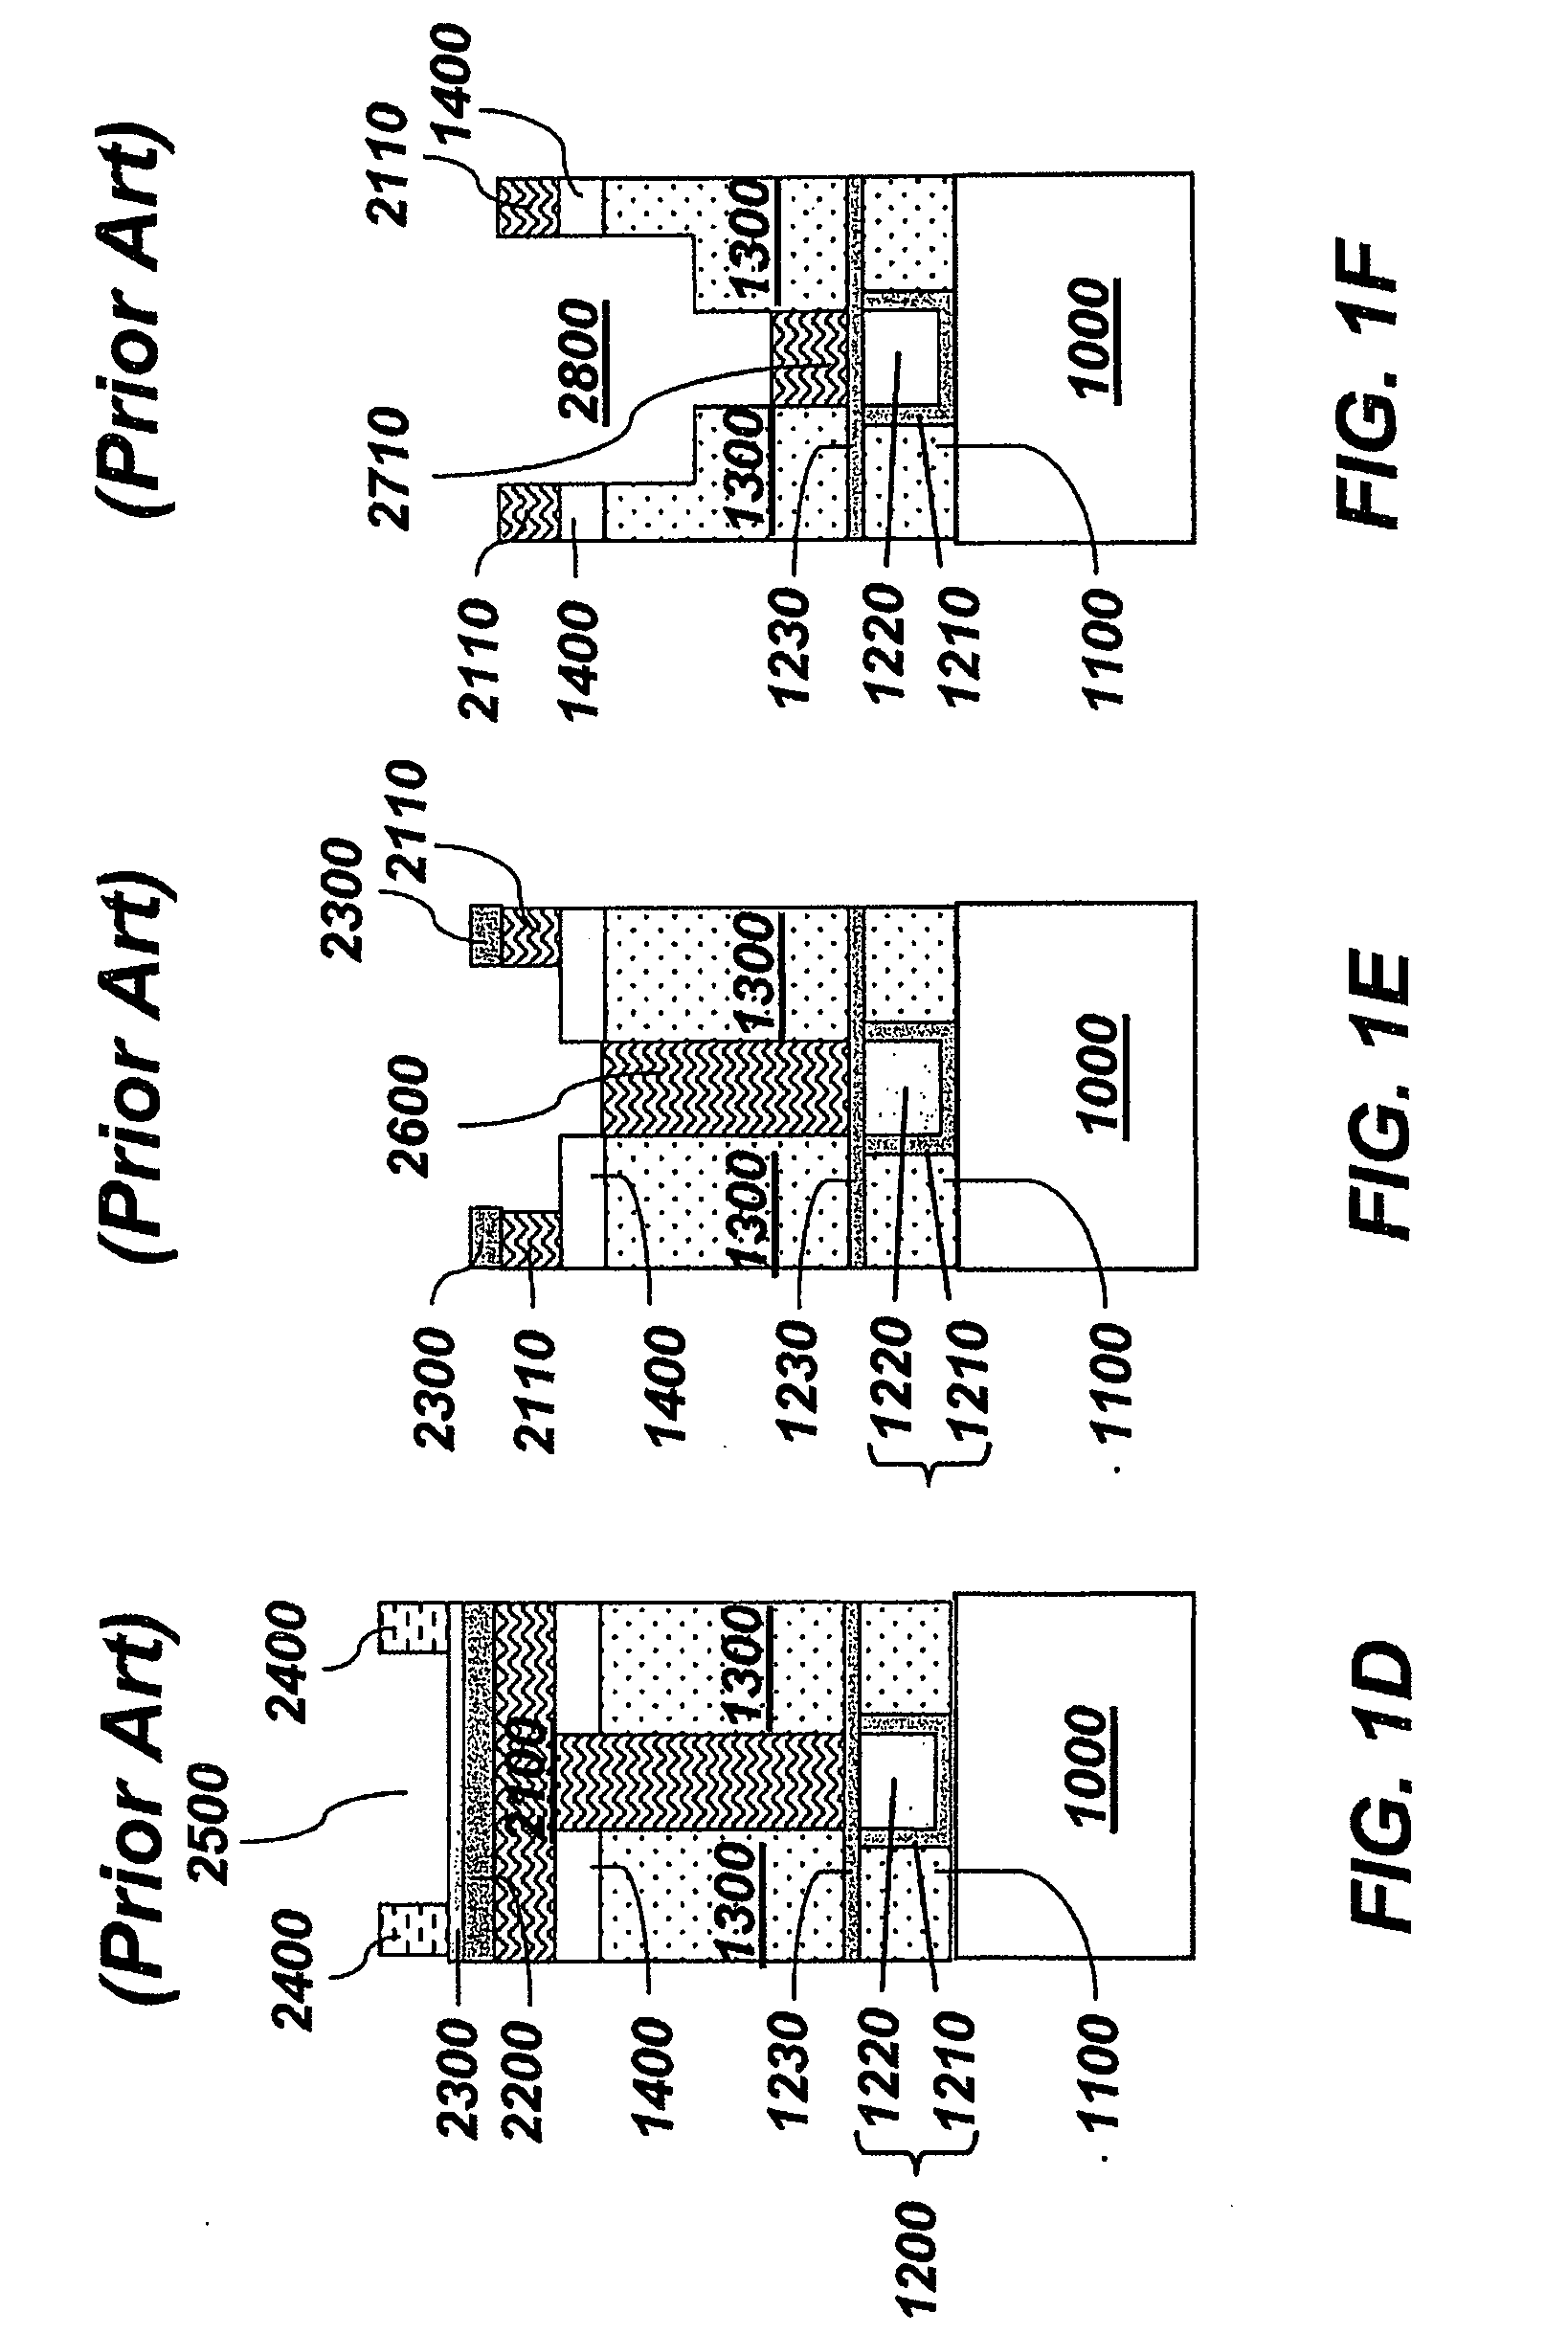 Methods to mitigate plasma damage in organosilicate dielectrics using a protective sidewall spacer